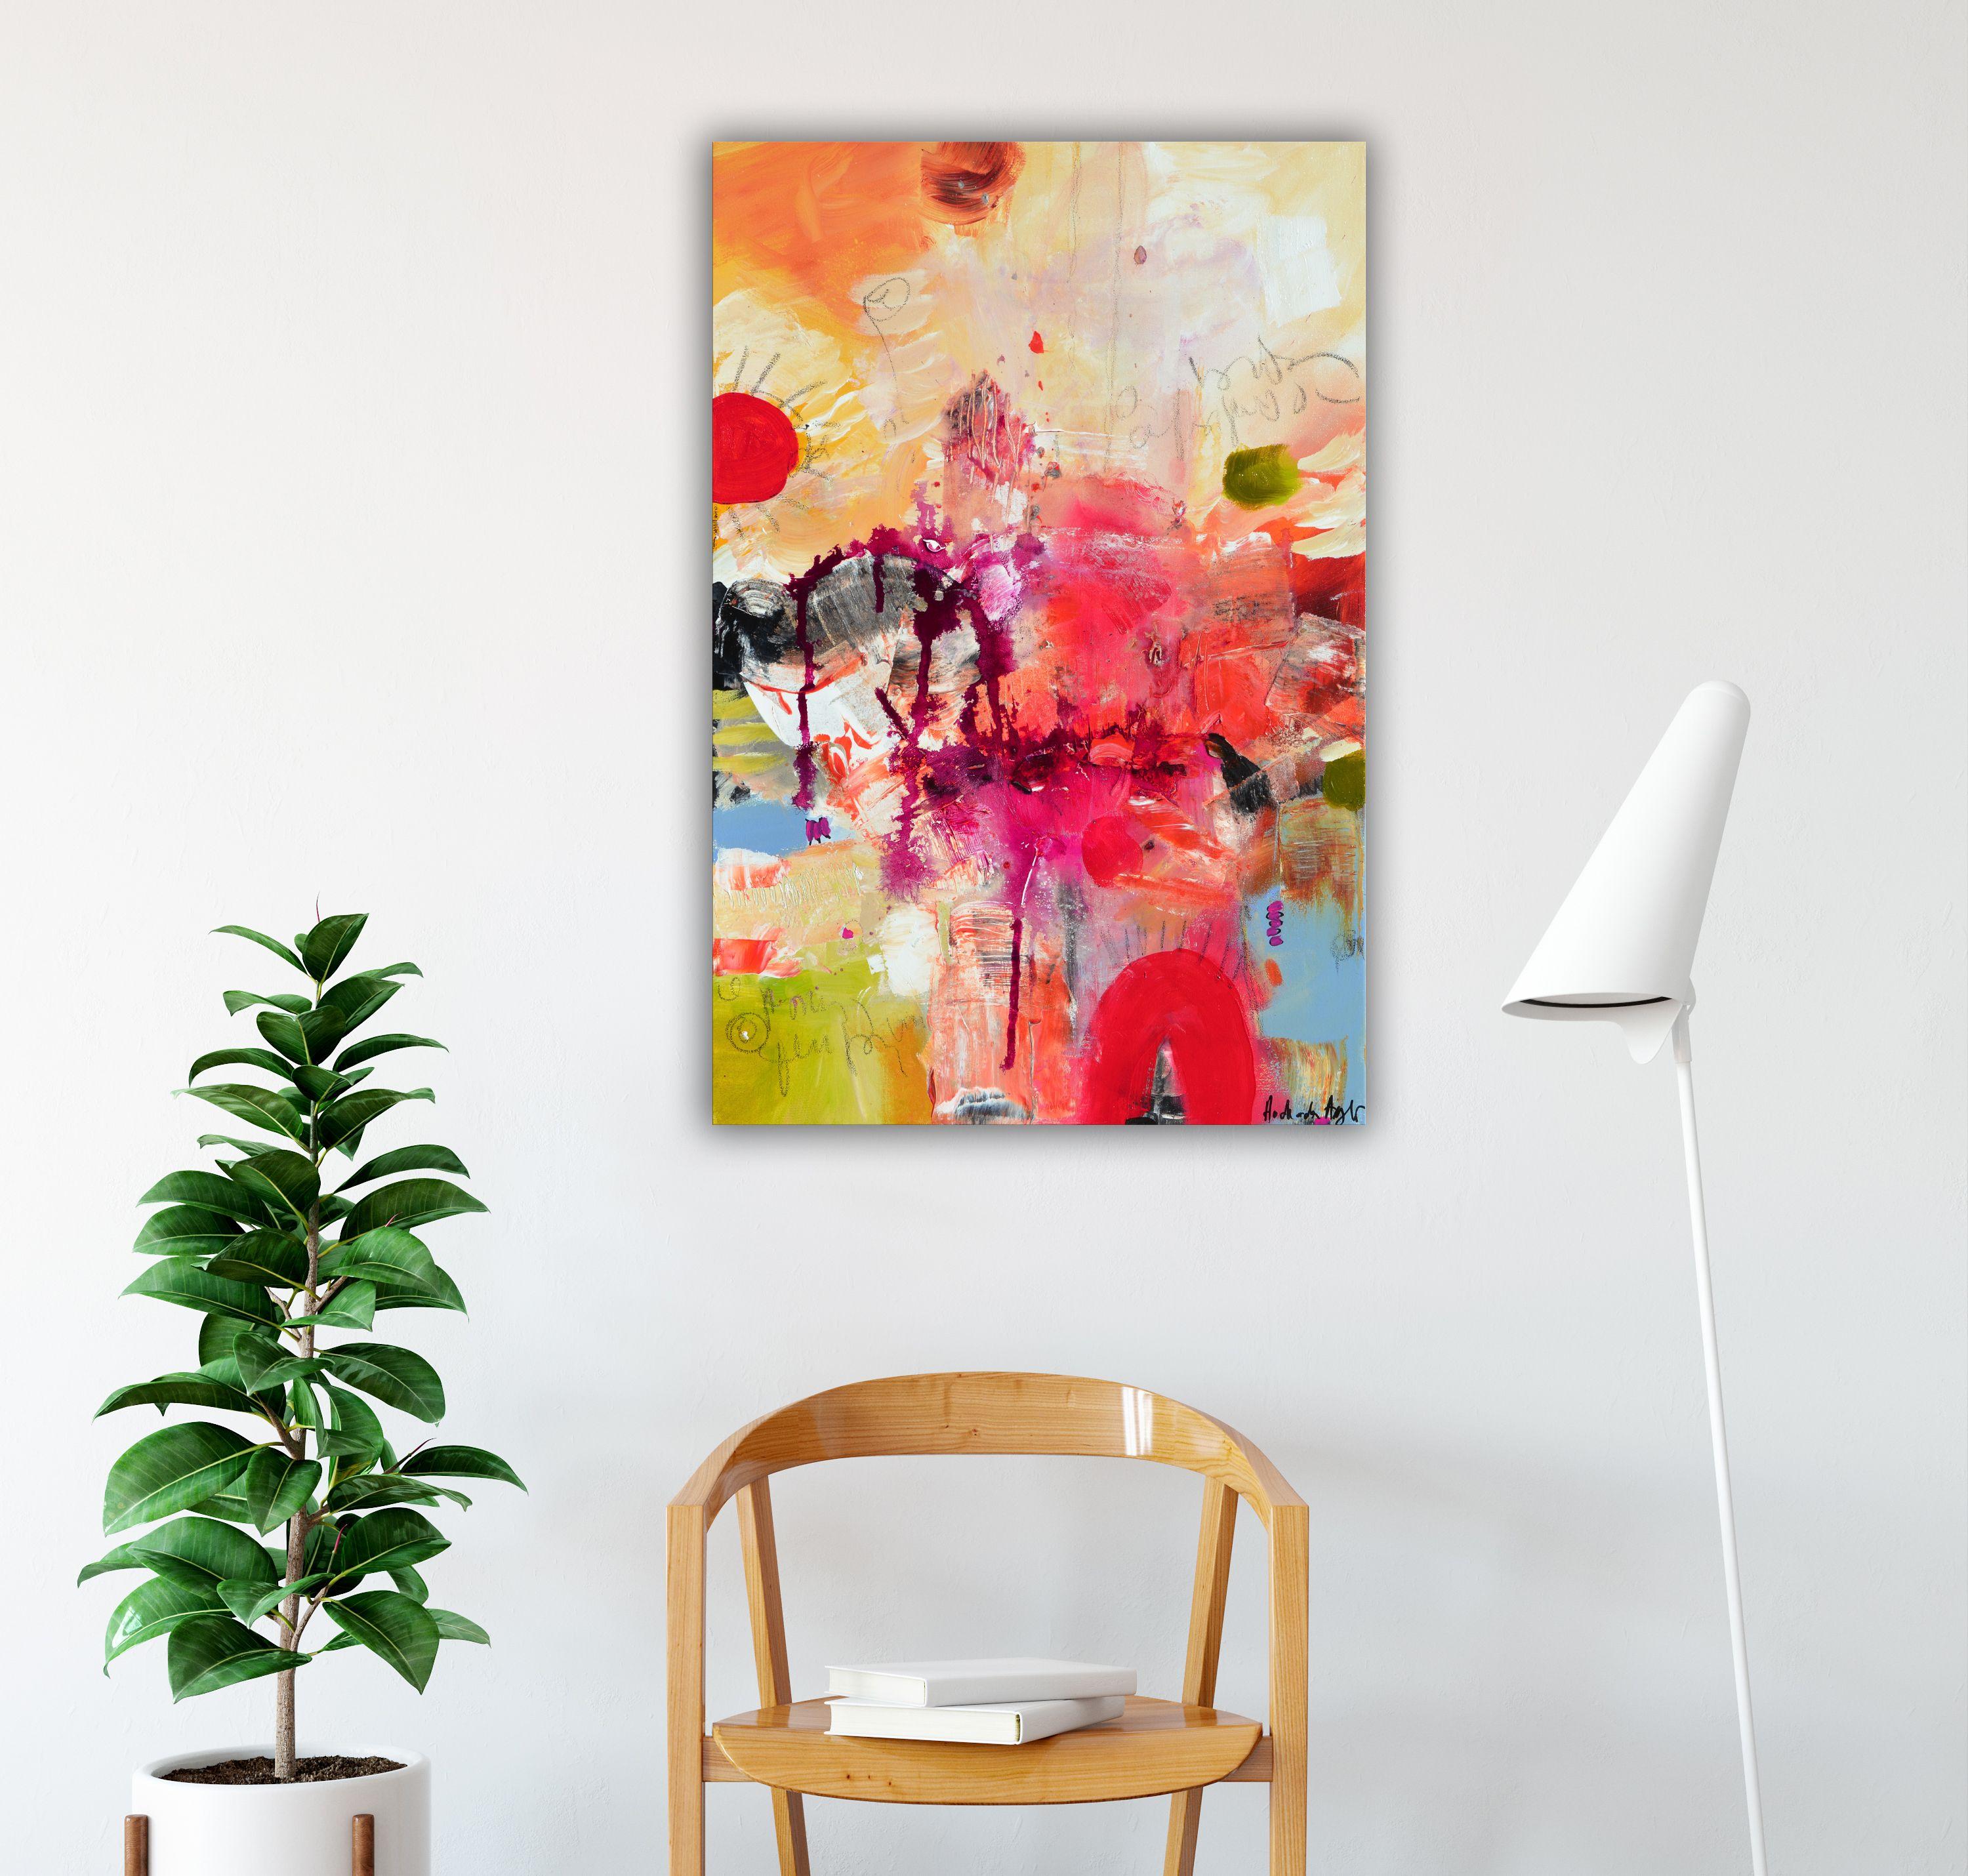 As a ginger flower, Painting, Acrylic on Canvas - Beige Abstract Painting by Andrada Anghel